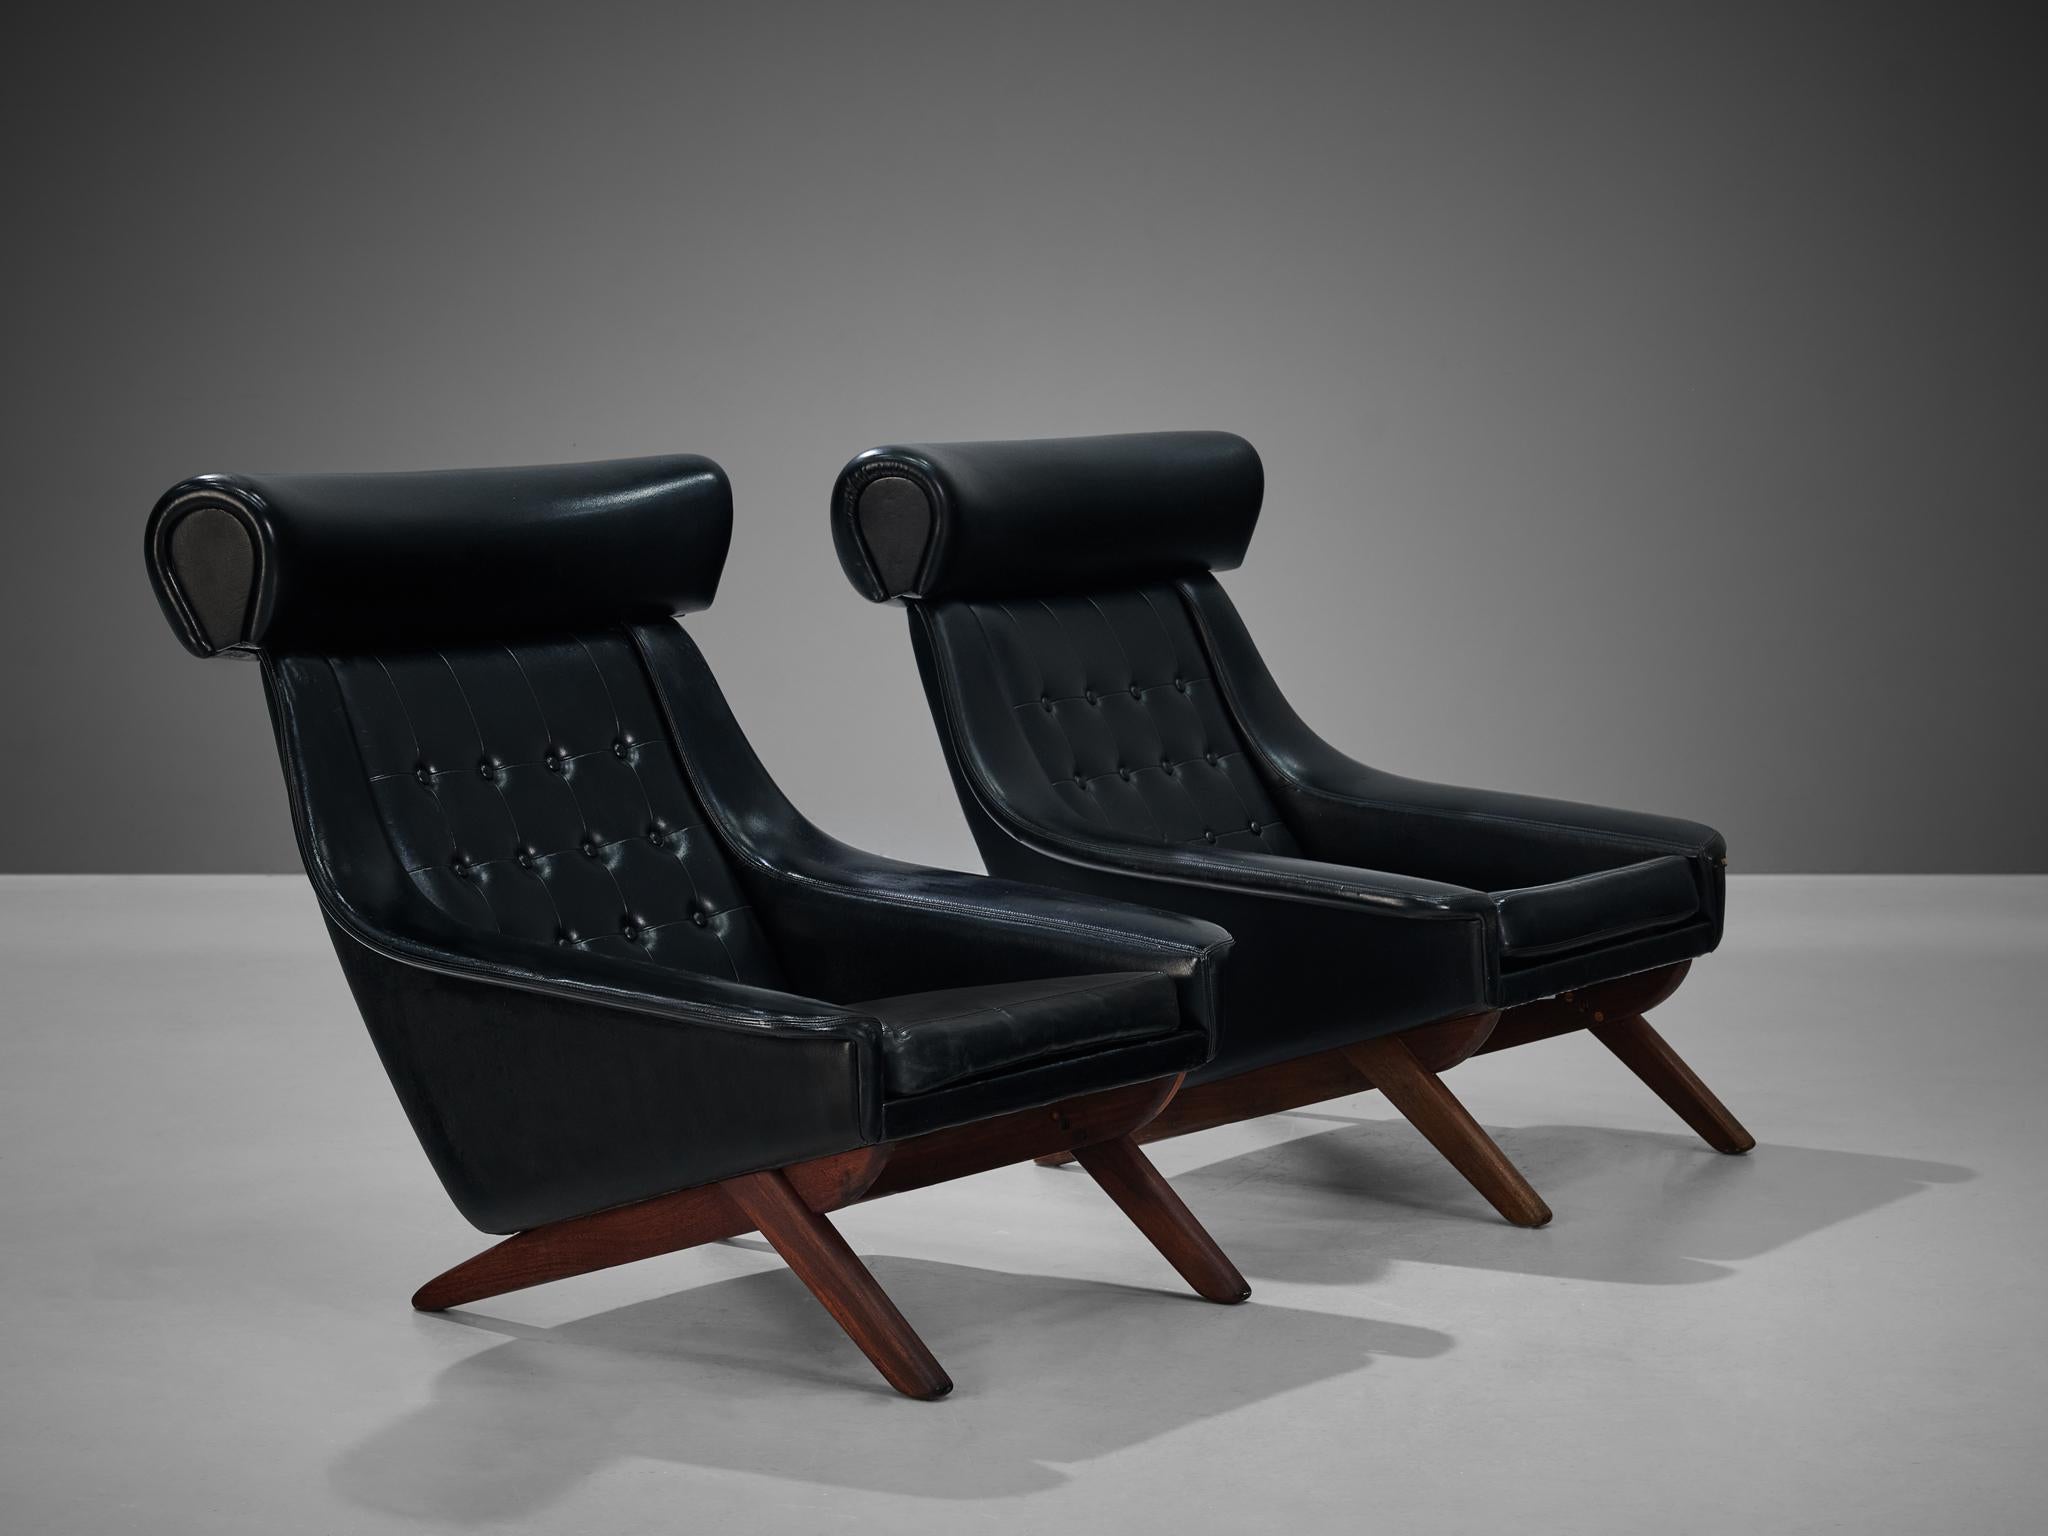 Illum Wikkelsø, pair of lounge chairs, leatherette, teak, Denmark 1960s.

Well-designed pair of easy chairs in black leatherette upholstery by Danish designer Illum Wikkelsø. This 'Ox Chair' shows some interesting details. Like the wide and large